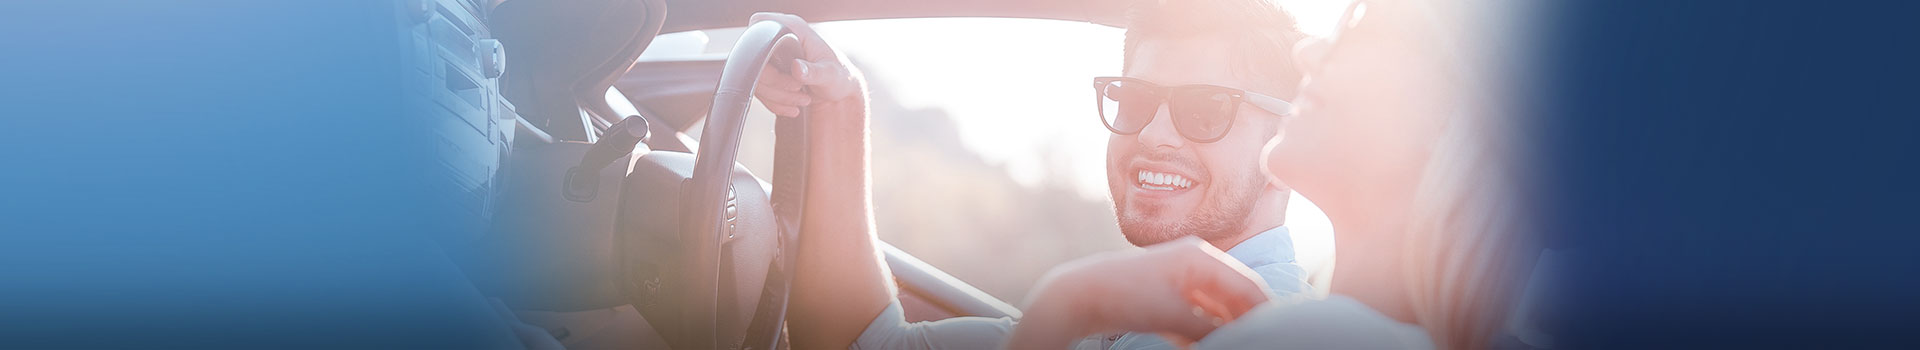 young man in sunglasses driving